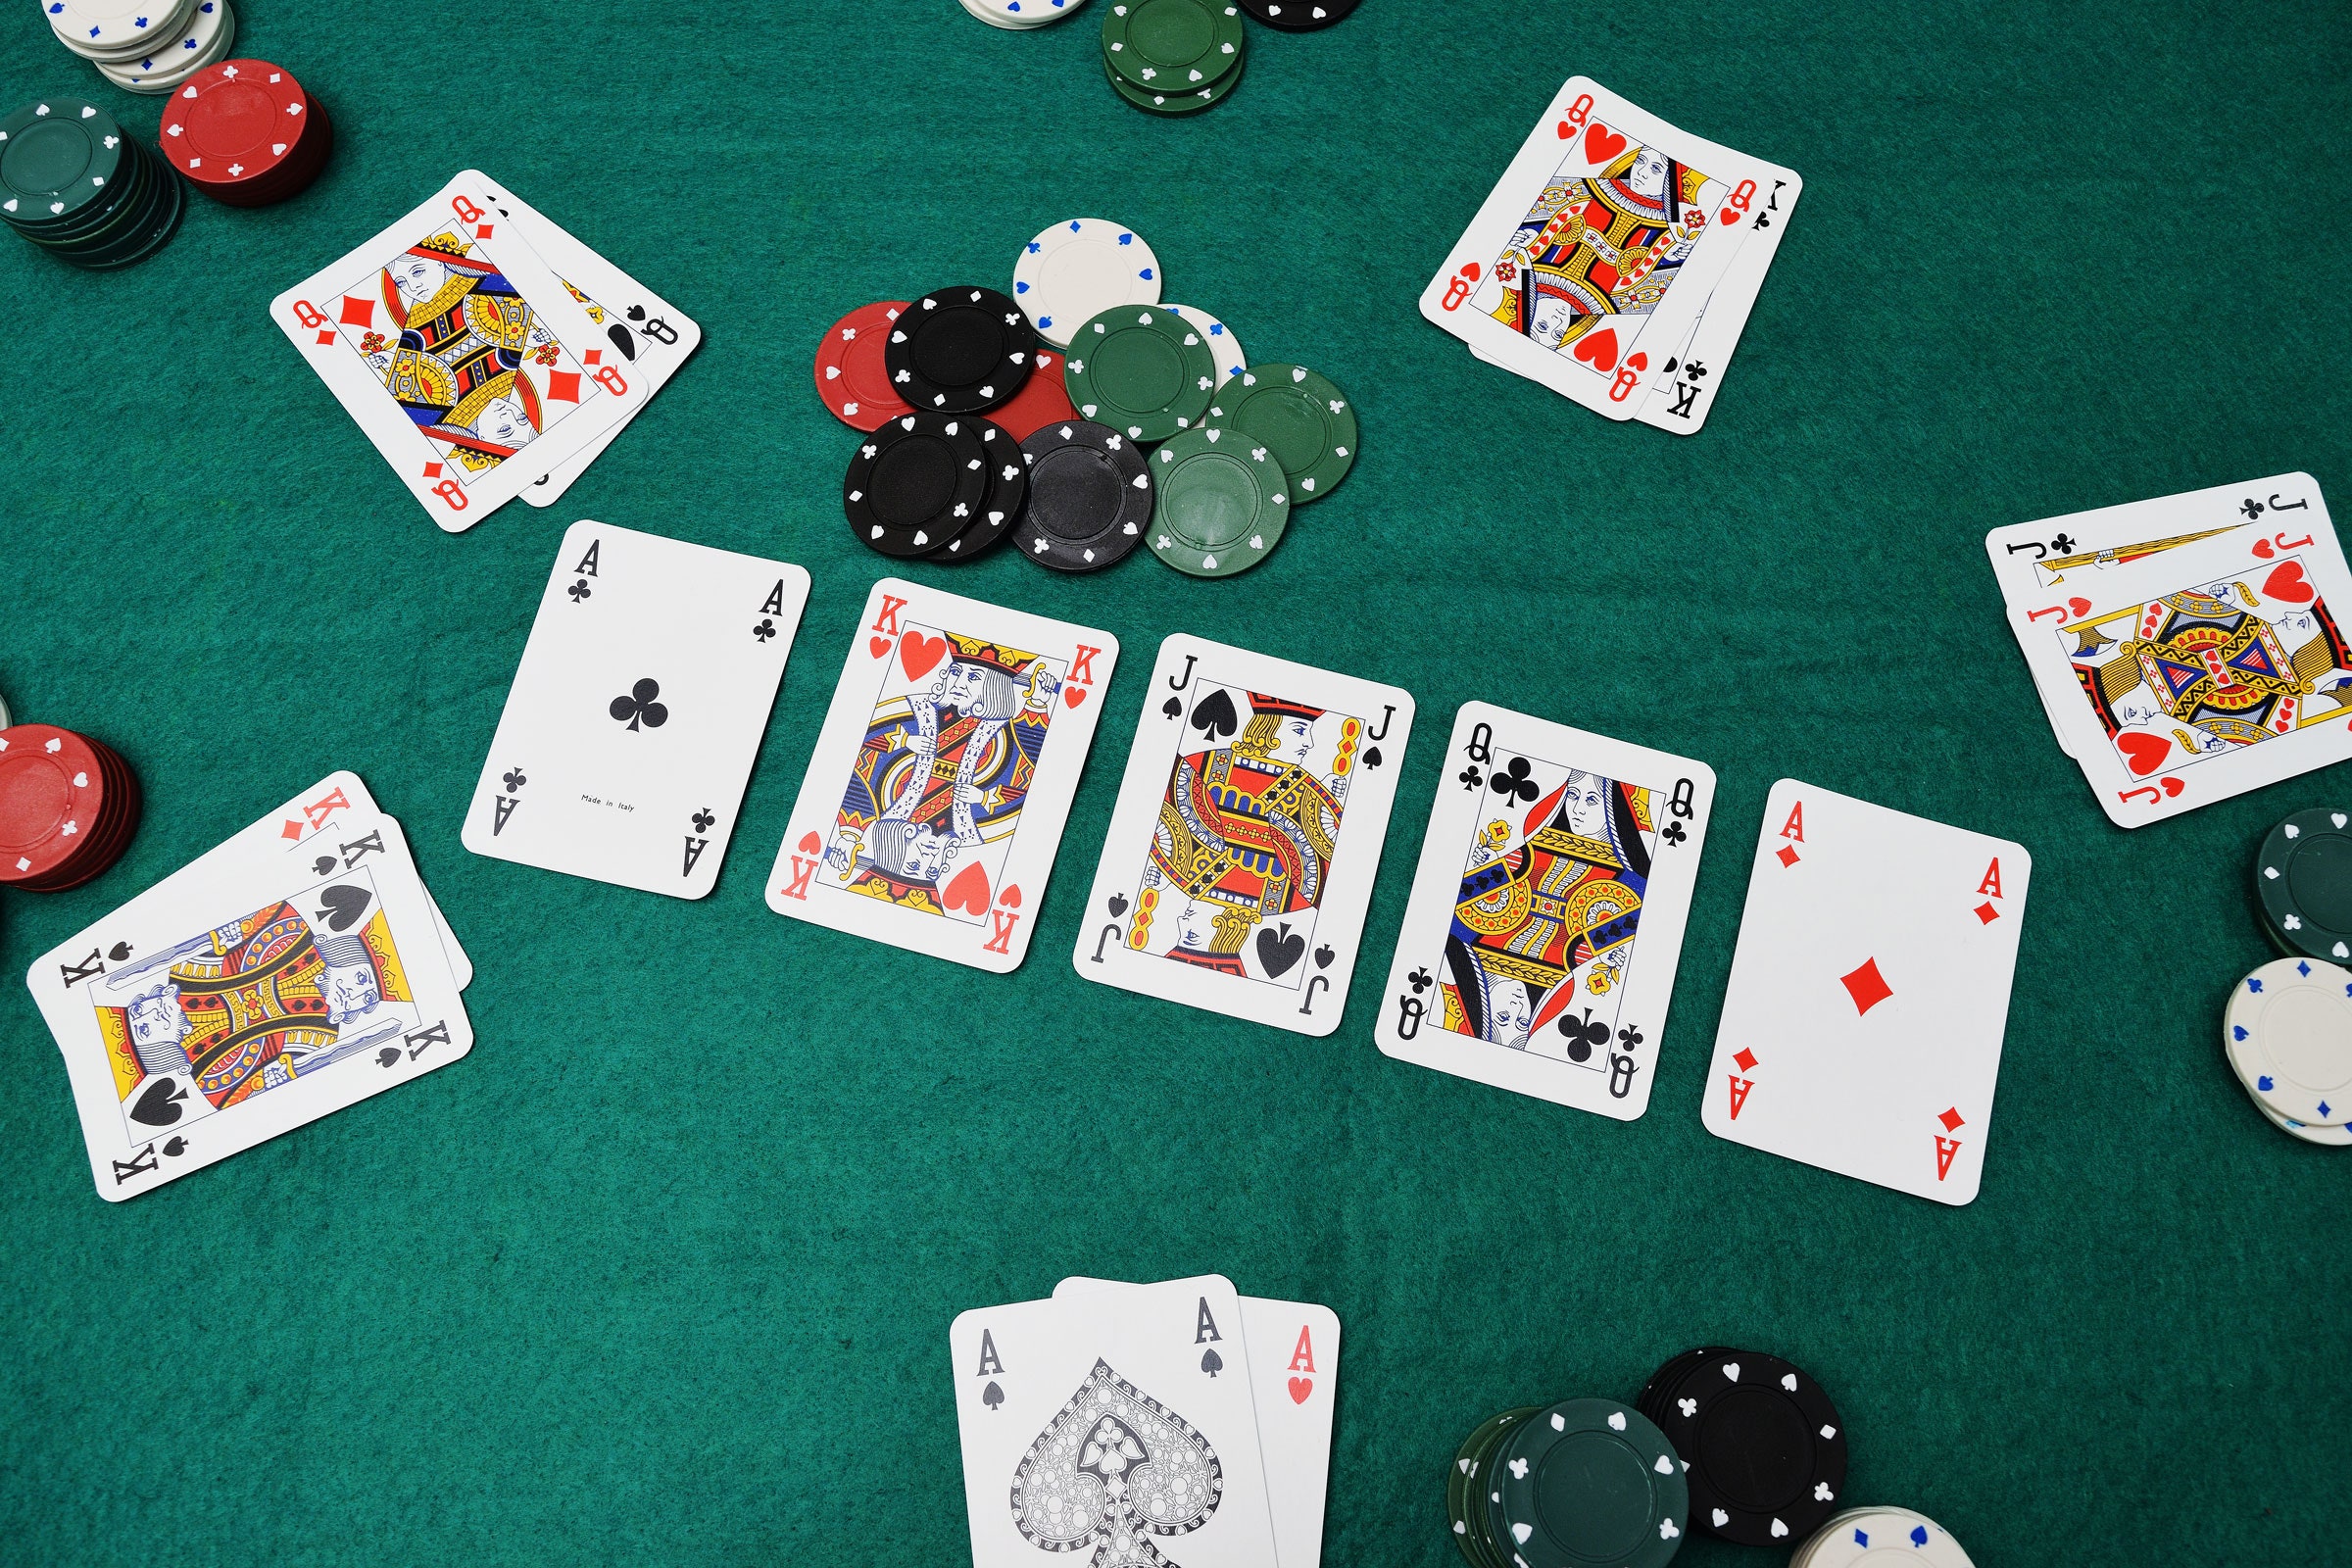 Online Casino: The most convenient way to gamble online